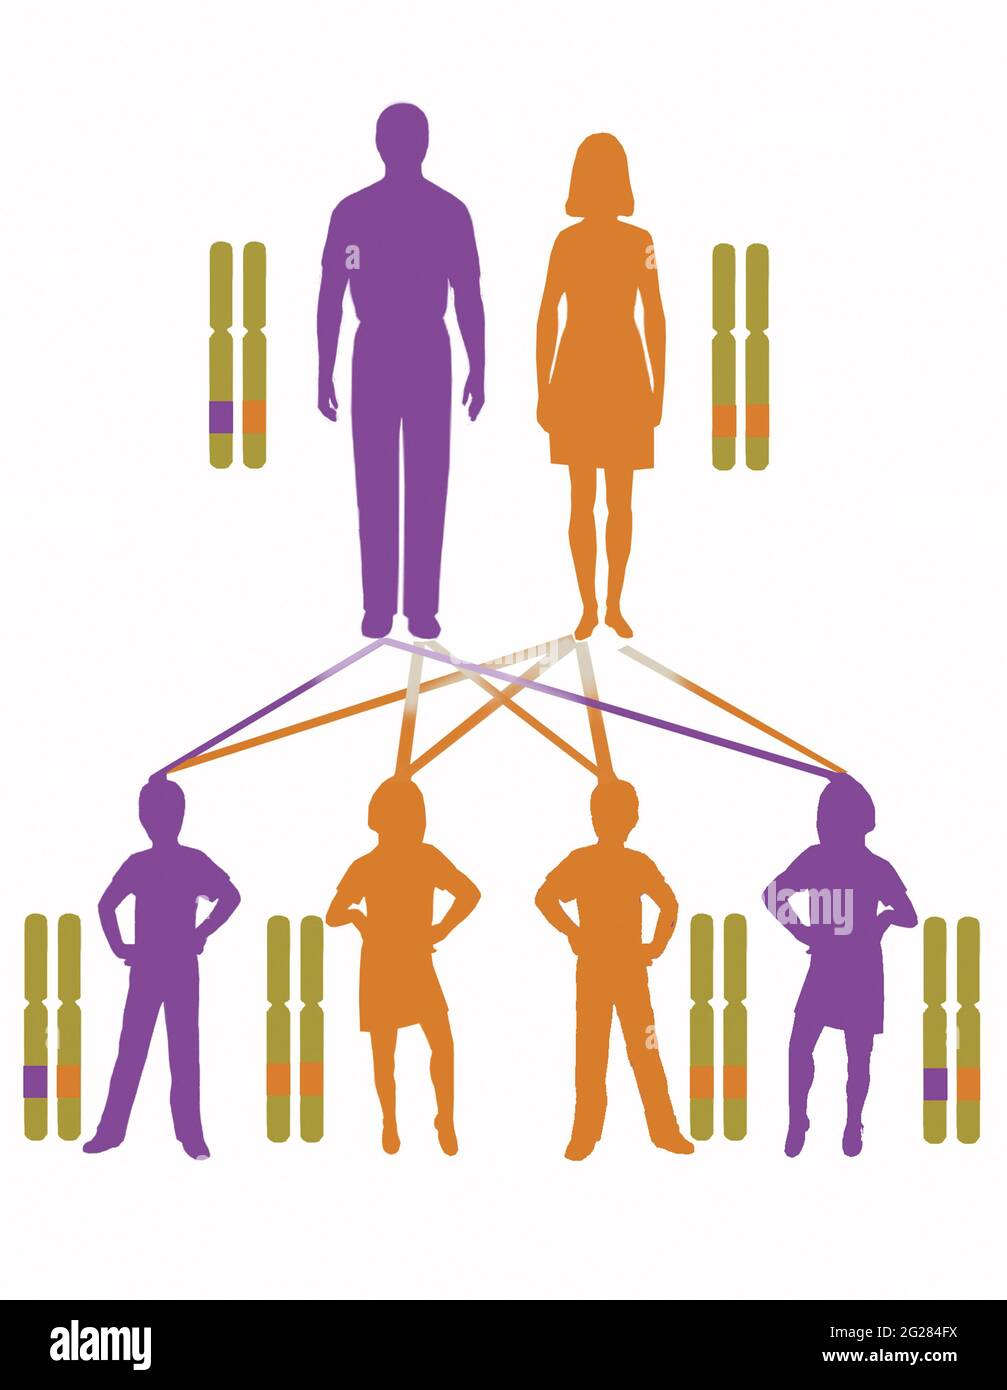 Infographic showing inheritance pattern for autosomal dominant genes. Stock Photo